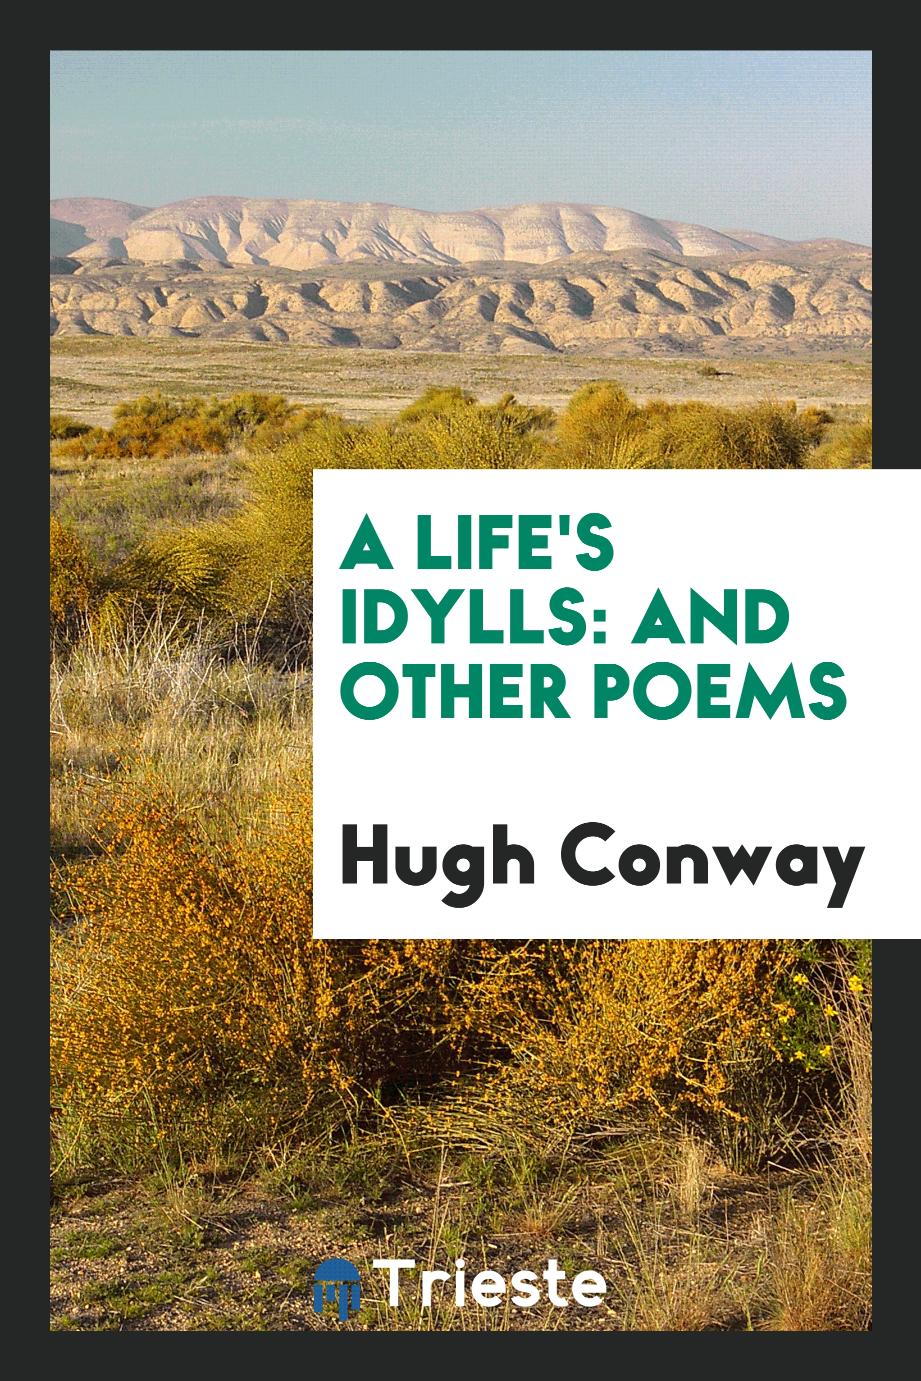 A Life's Idylls: And Other Poems